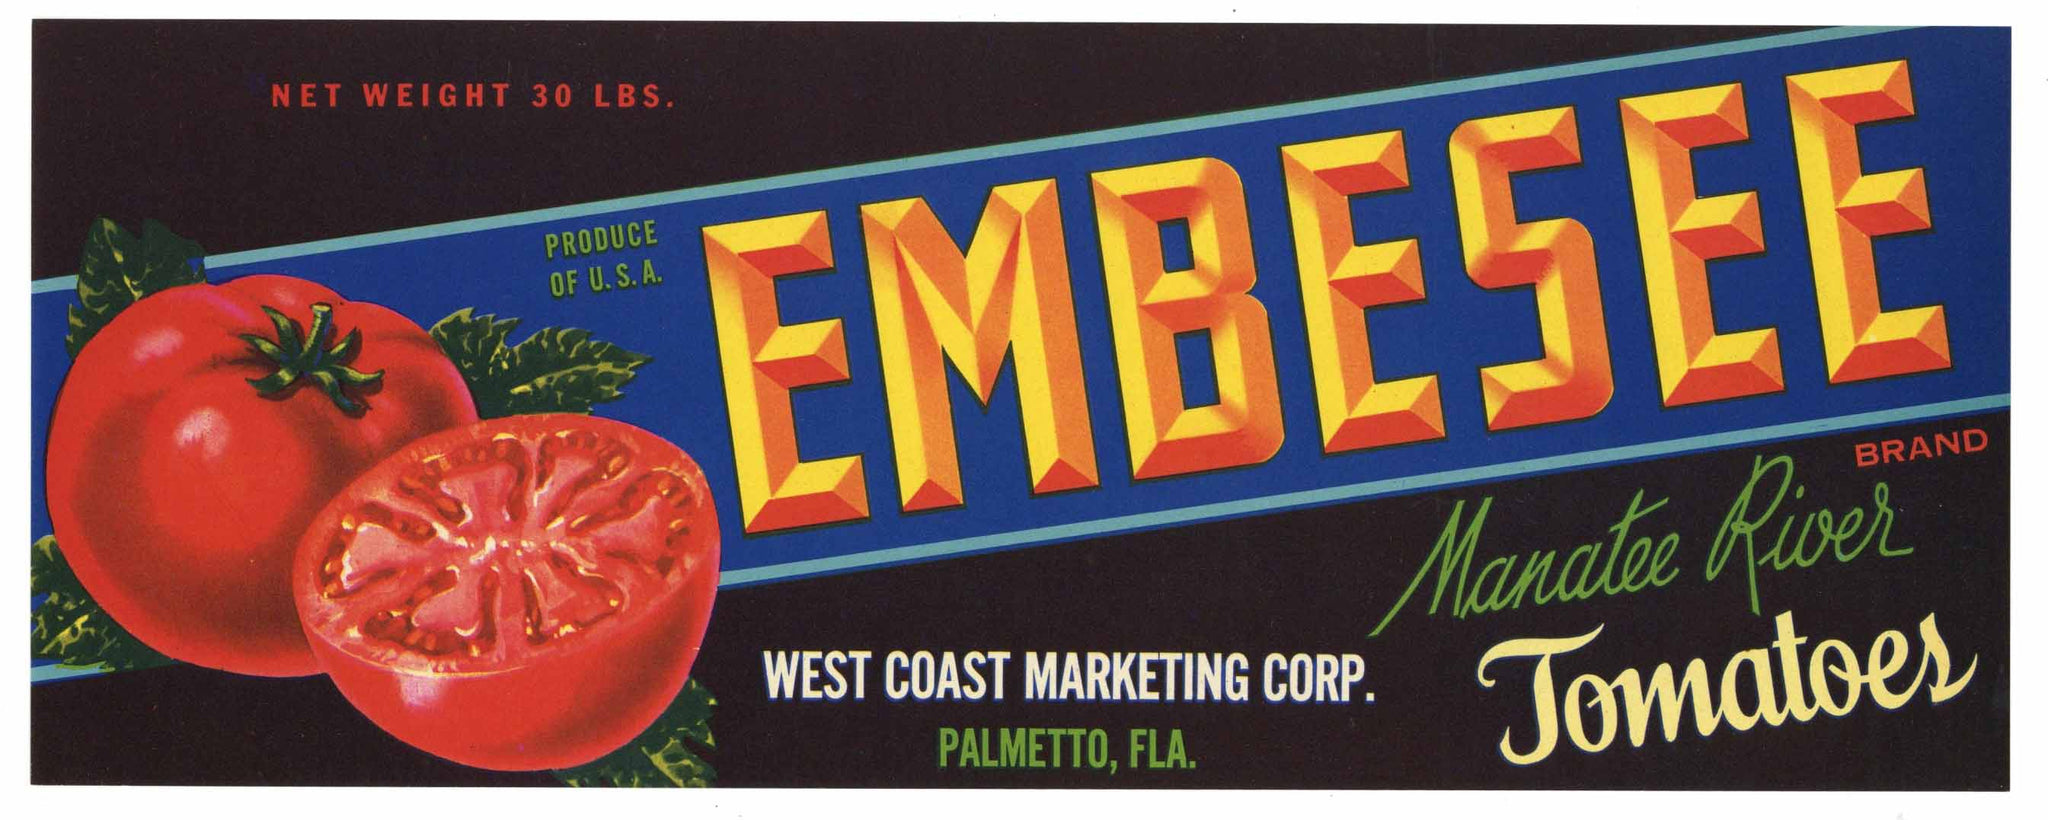 Embesee Brand Vintage Palmetto Florida Produce Crate Label, Tomato